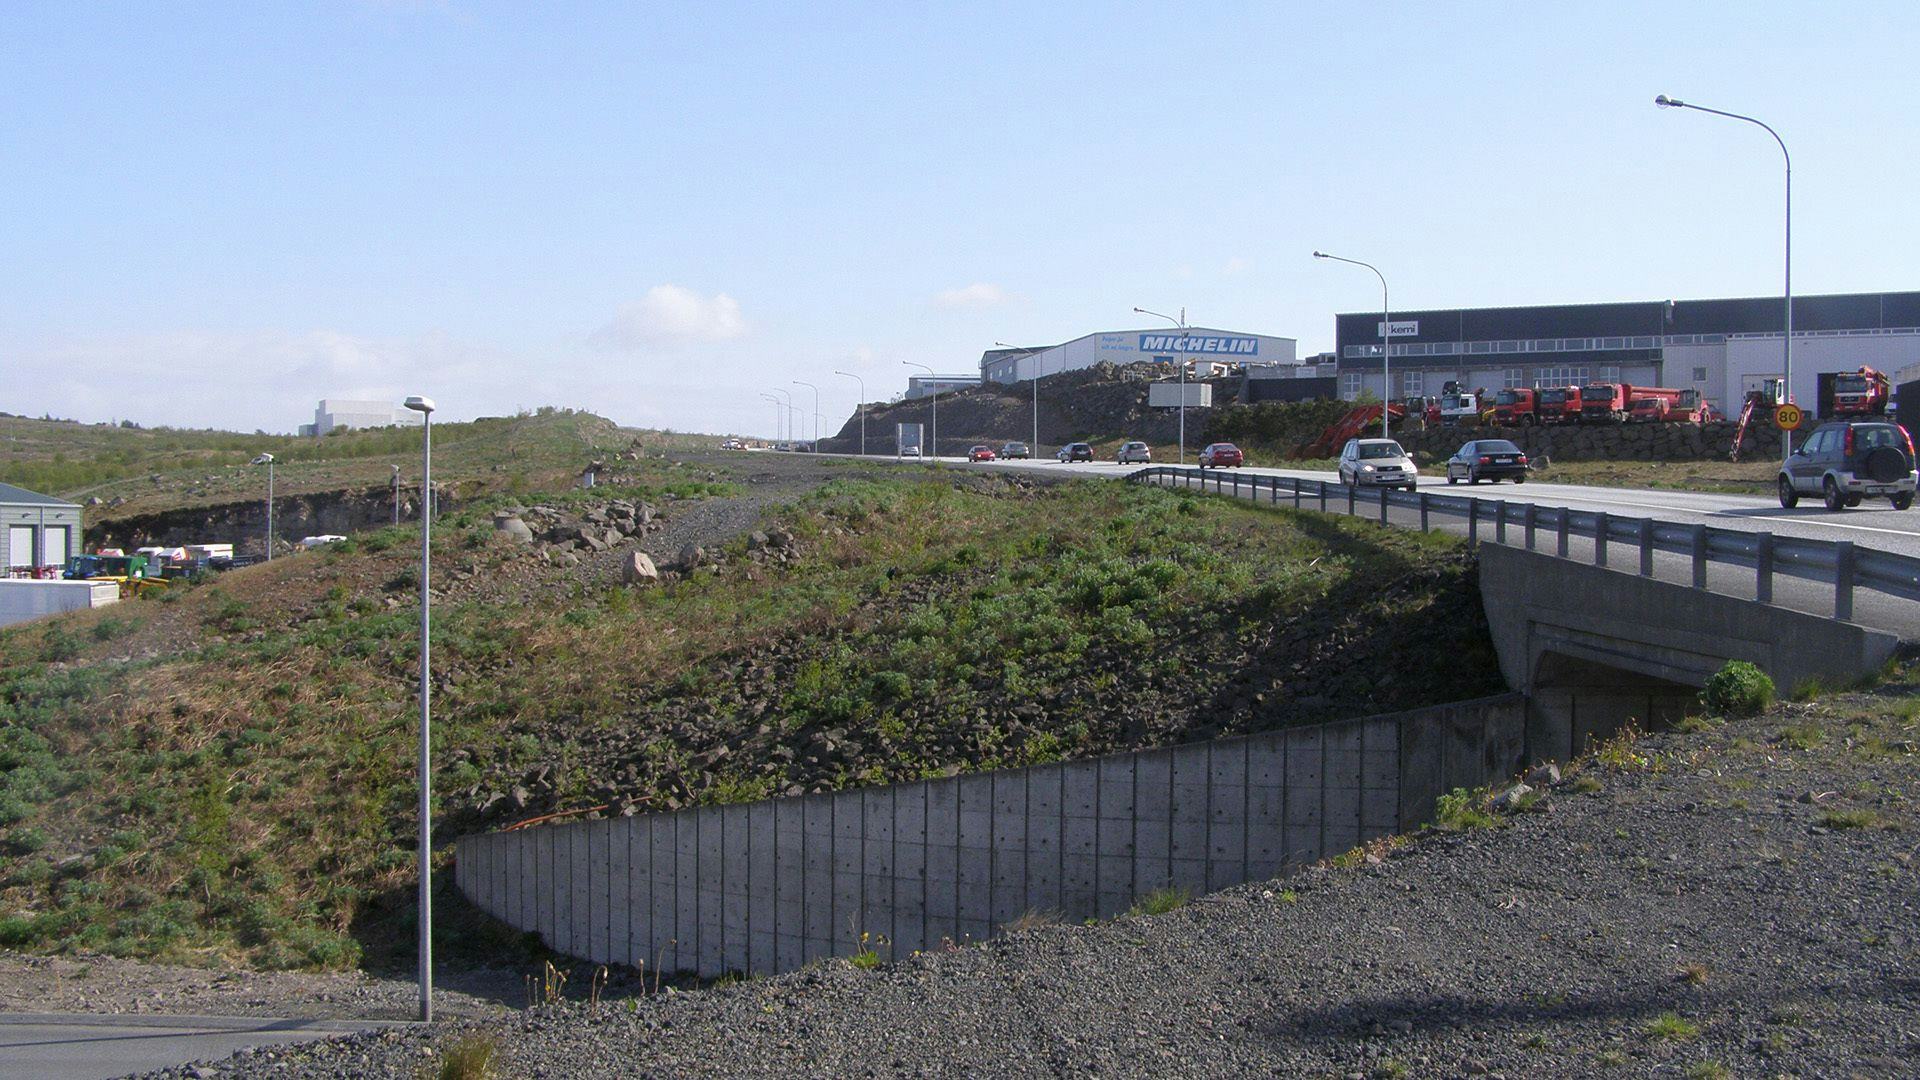 A road with cars and grassy embankment in the foreground 